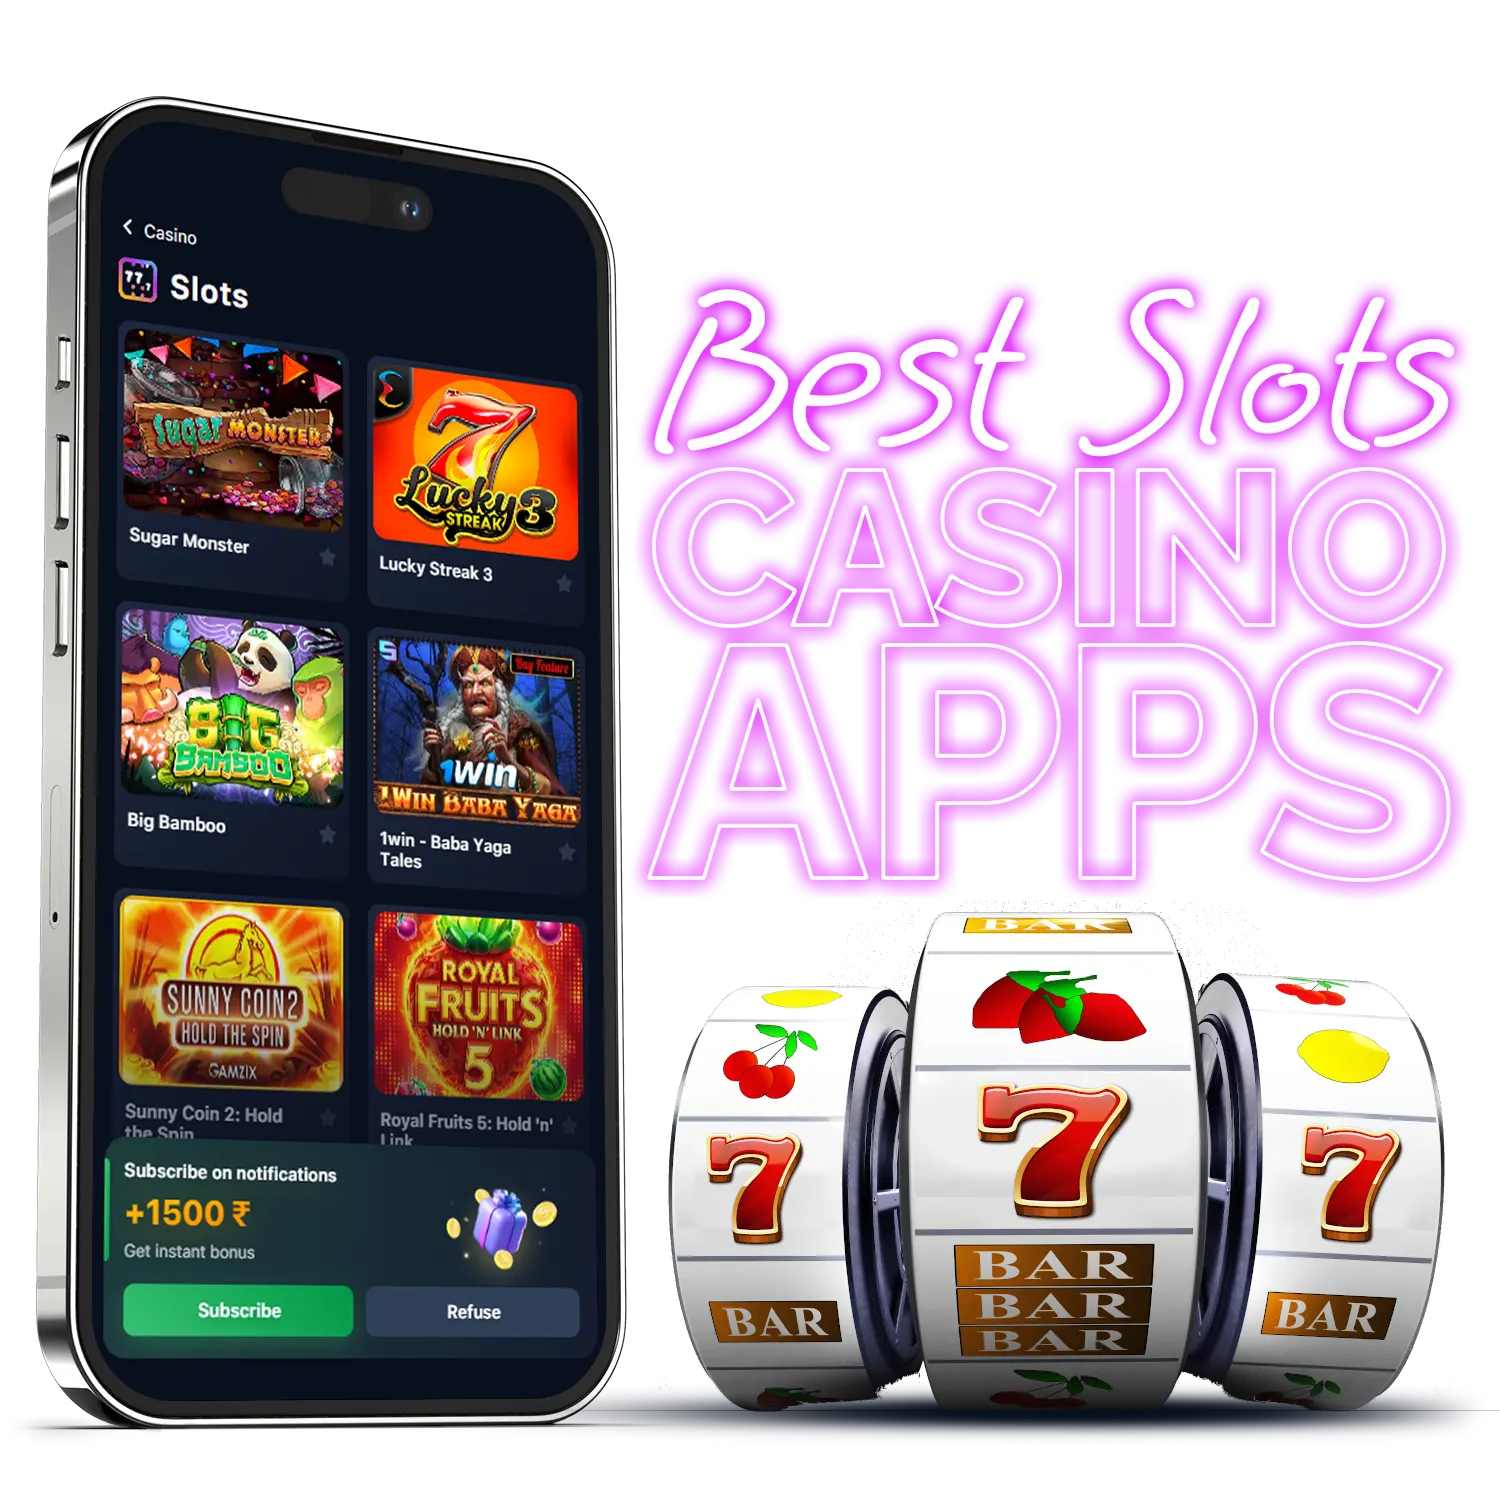 Play the best slots in casinos, read the selection from Bestslots and choose the best app for your phone.